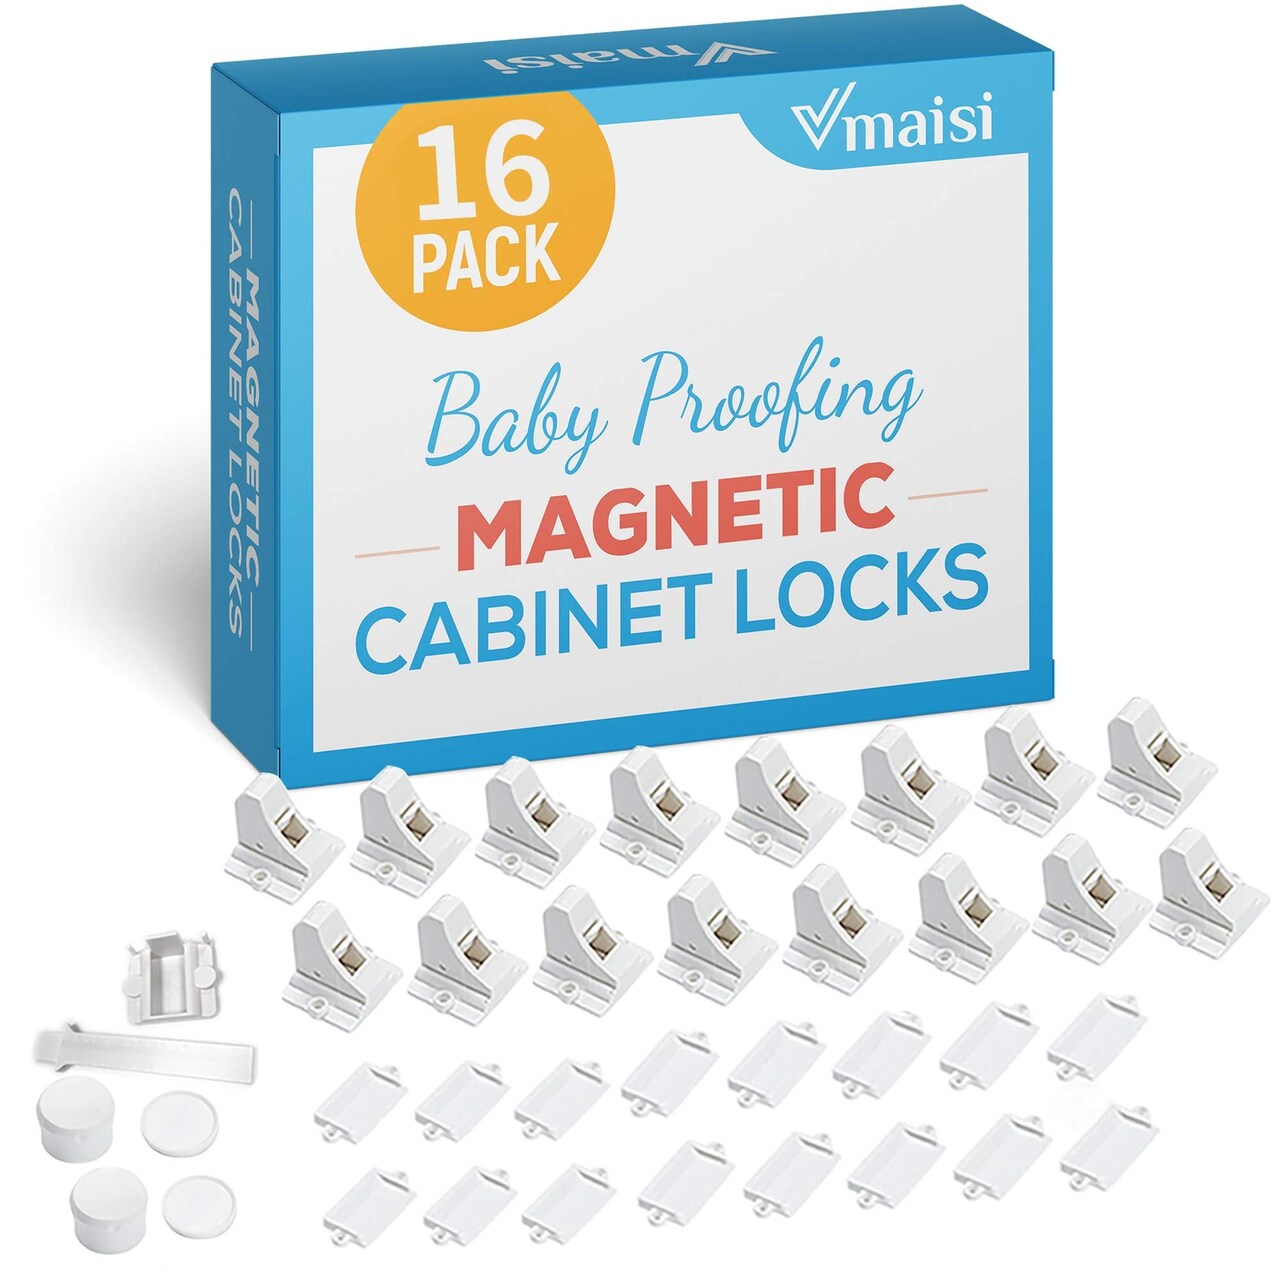 Vmaisi Adhesive Magnetic Locks for Cabinets & Drawers (16 Locks